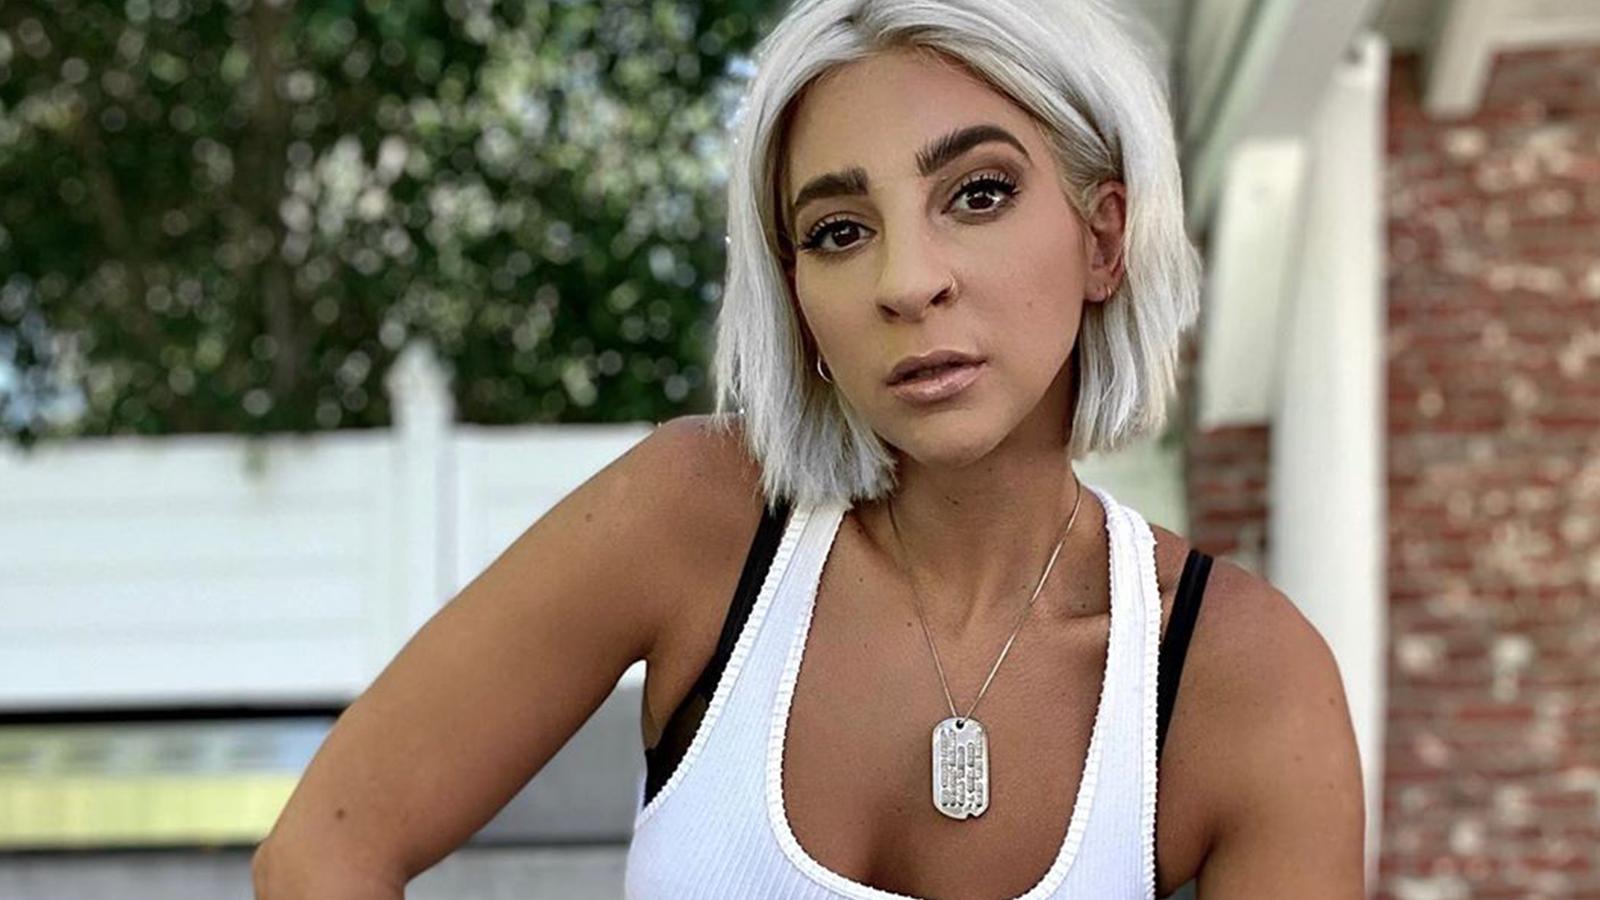 Gabbie Hanna poses in an Instagram picture